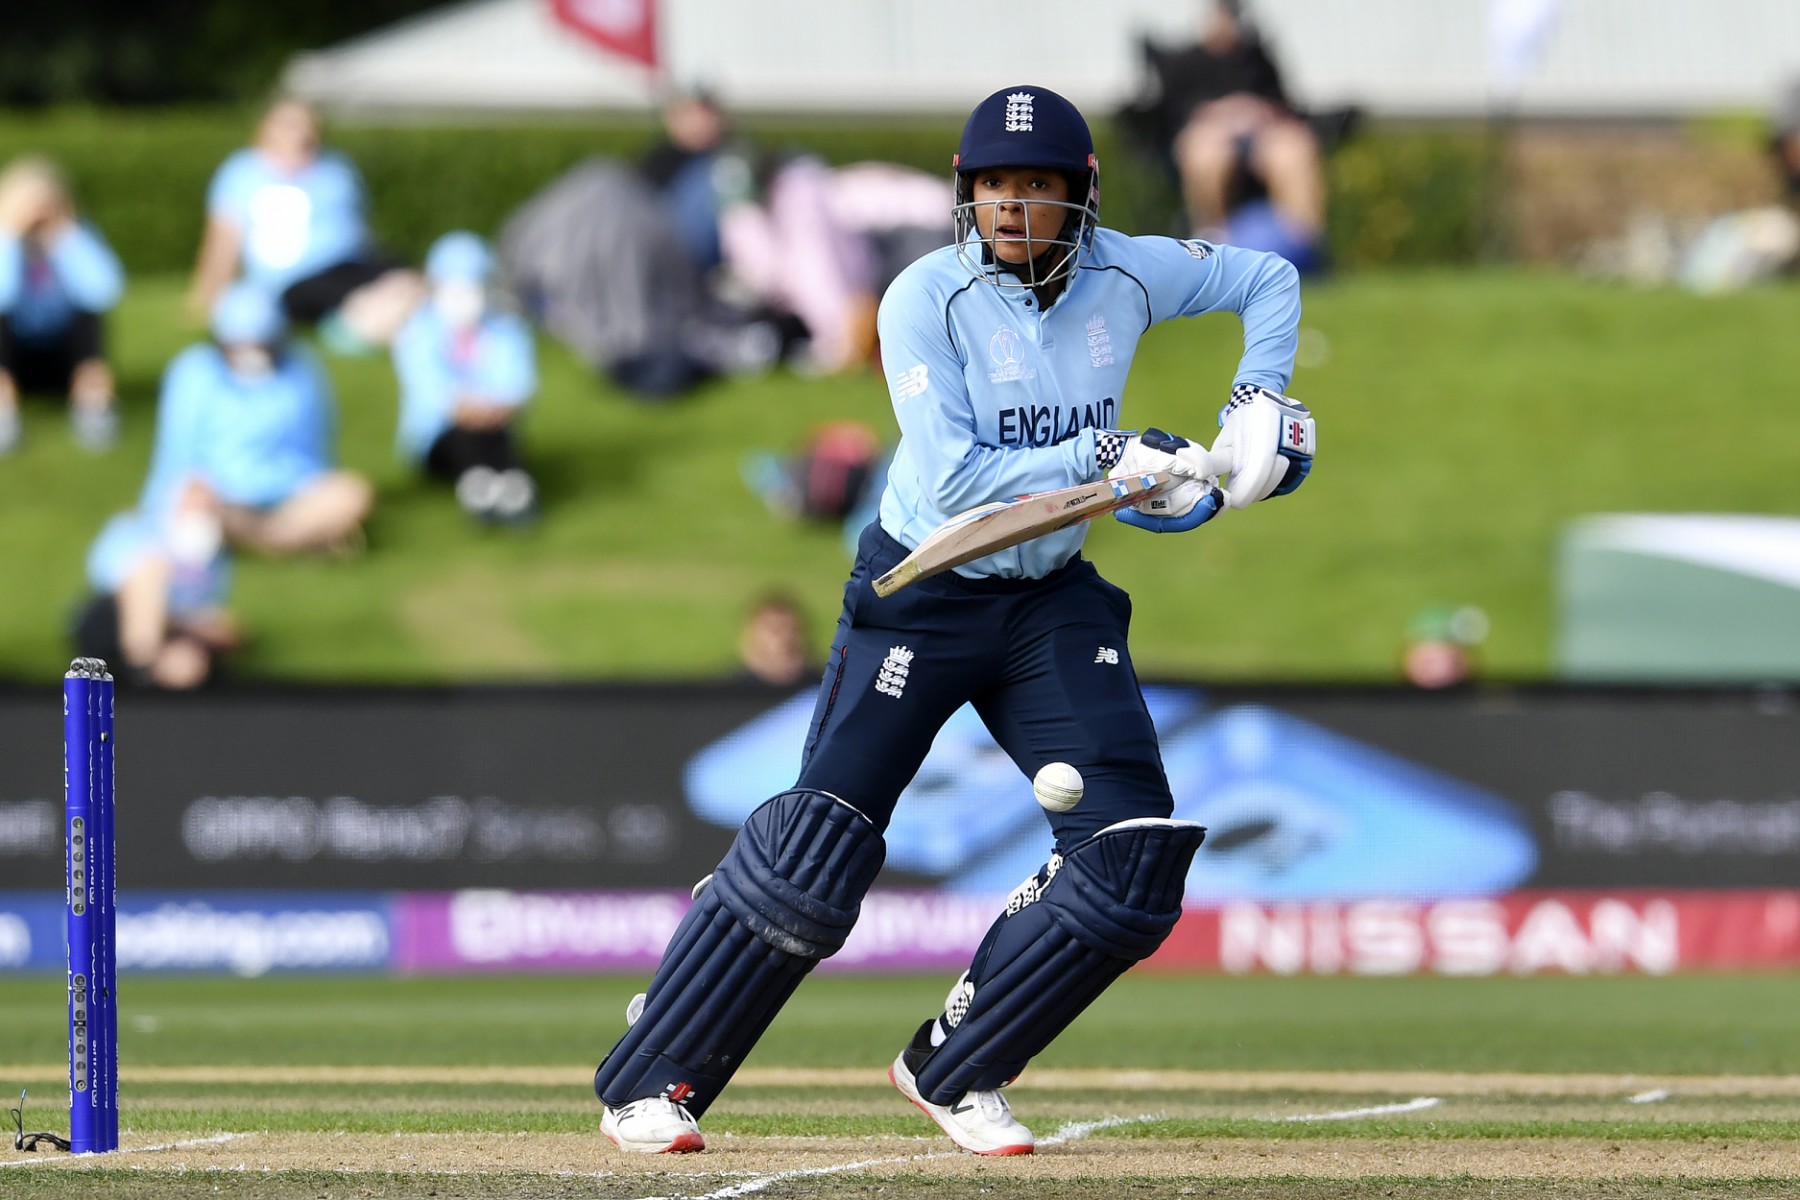 Dunkley's resilient 57 gives ENG a great start